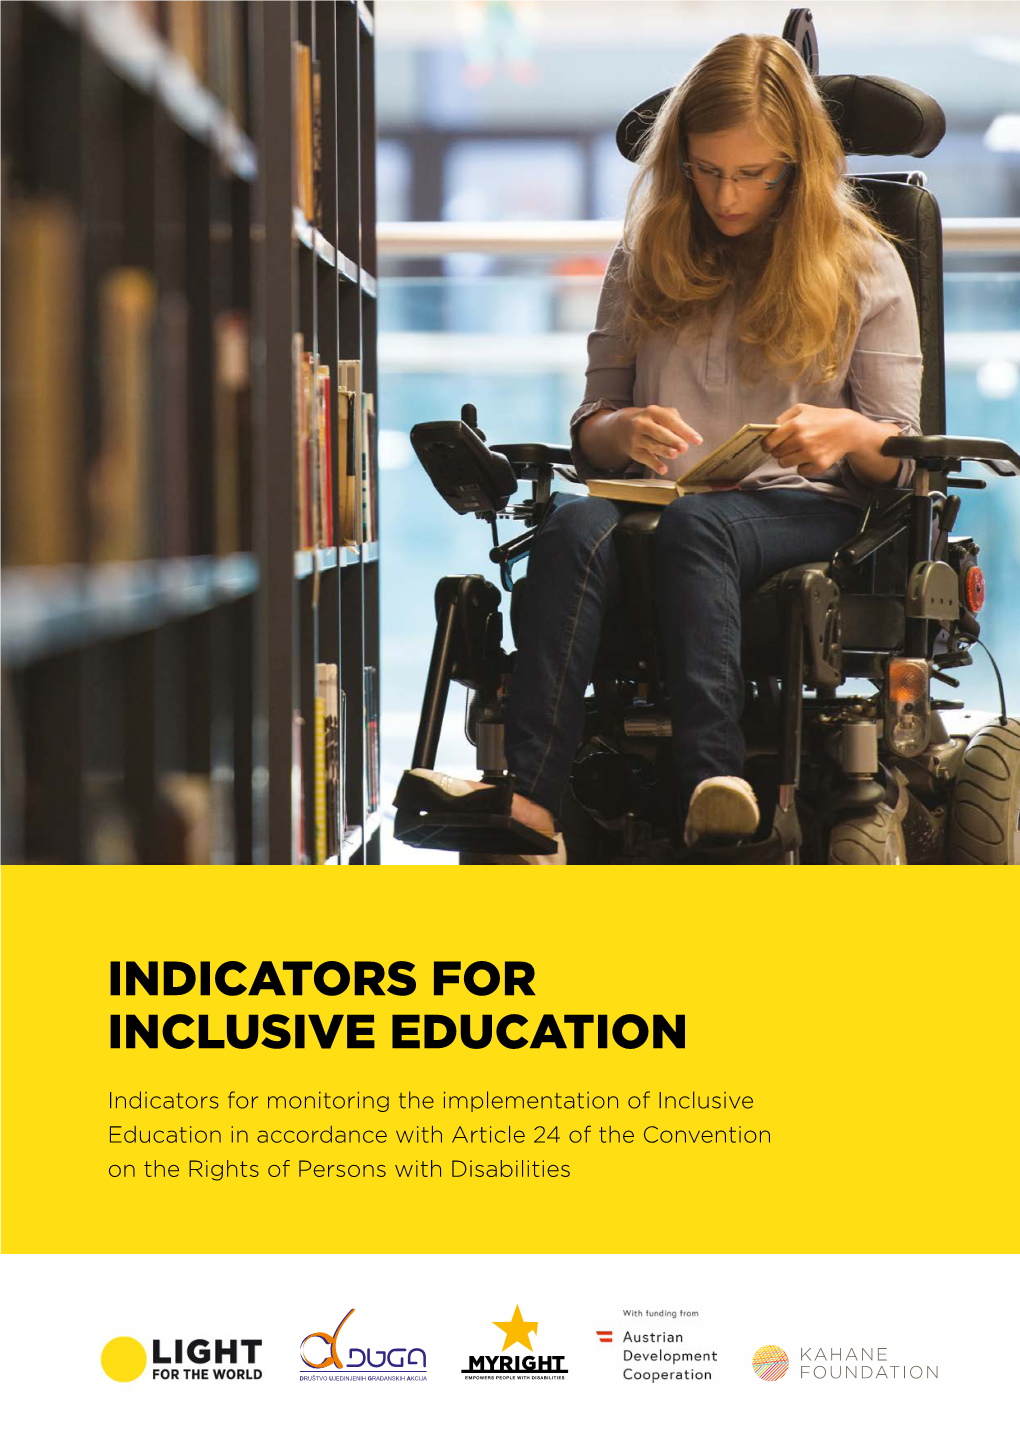 Download the Manual on Indicators for Inclusive Education